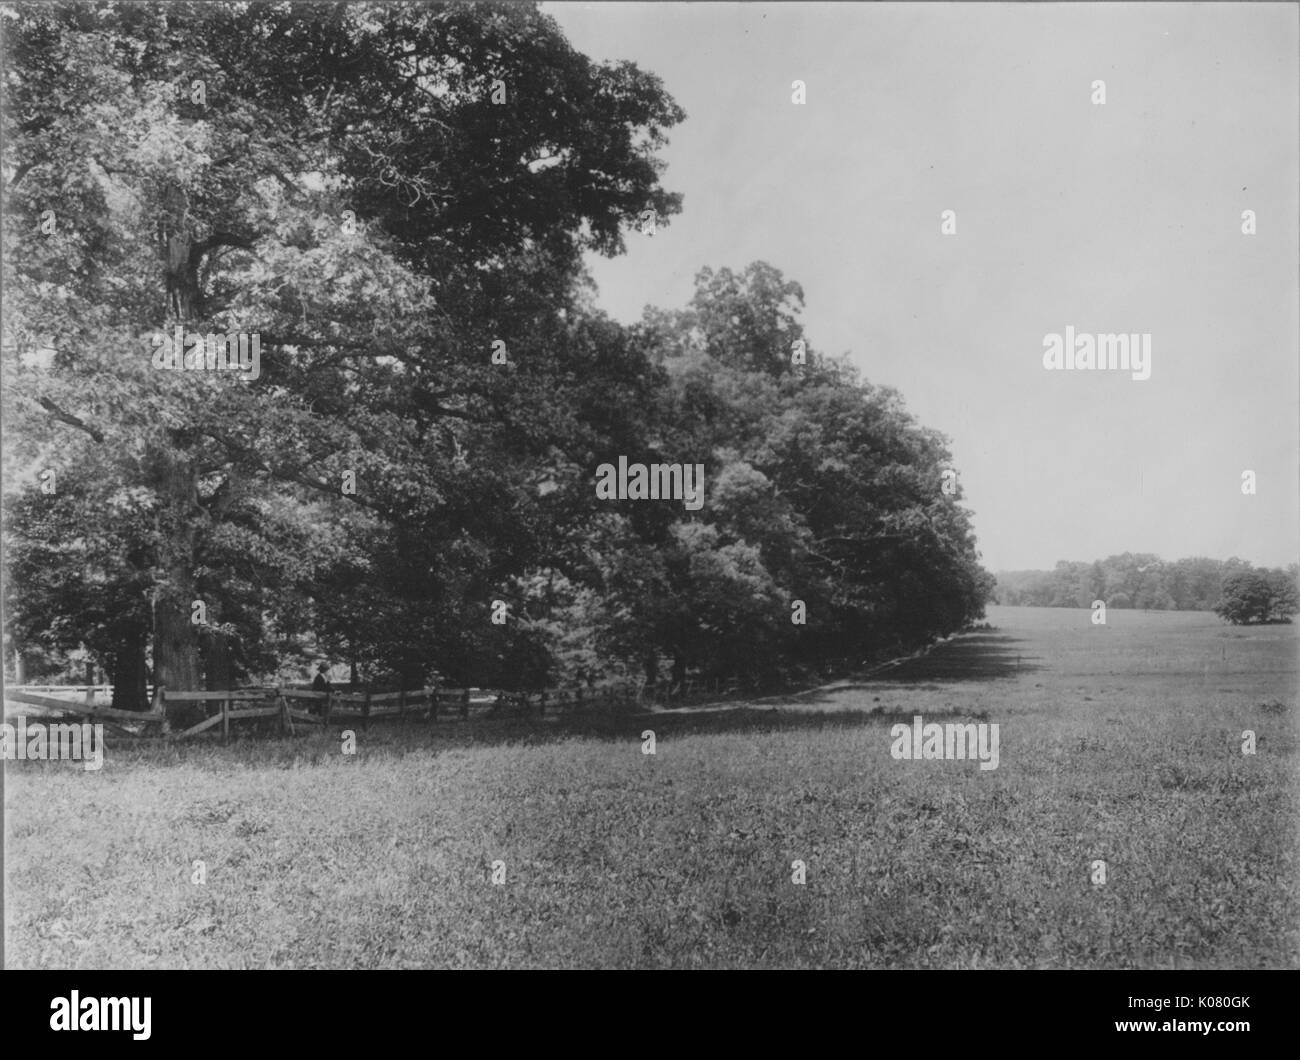 Landscape shot of grassy field with tall trees, Roland Park/Guilford, United States, 1910. This image is from a series documenting the construction and sale of homes in the Roland Park/Guilford neighborhood of Baltimore, a streetcar suburb and one of the first planned communities in the United States. Stock Photo